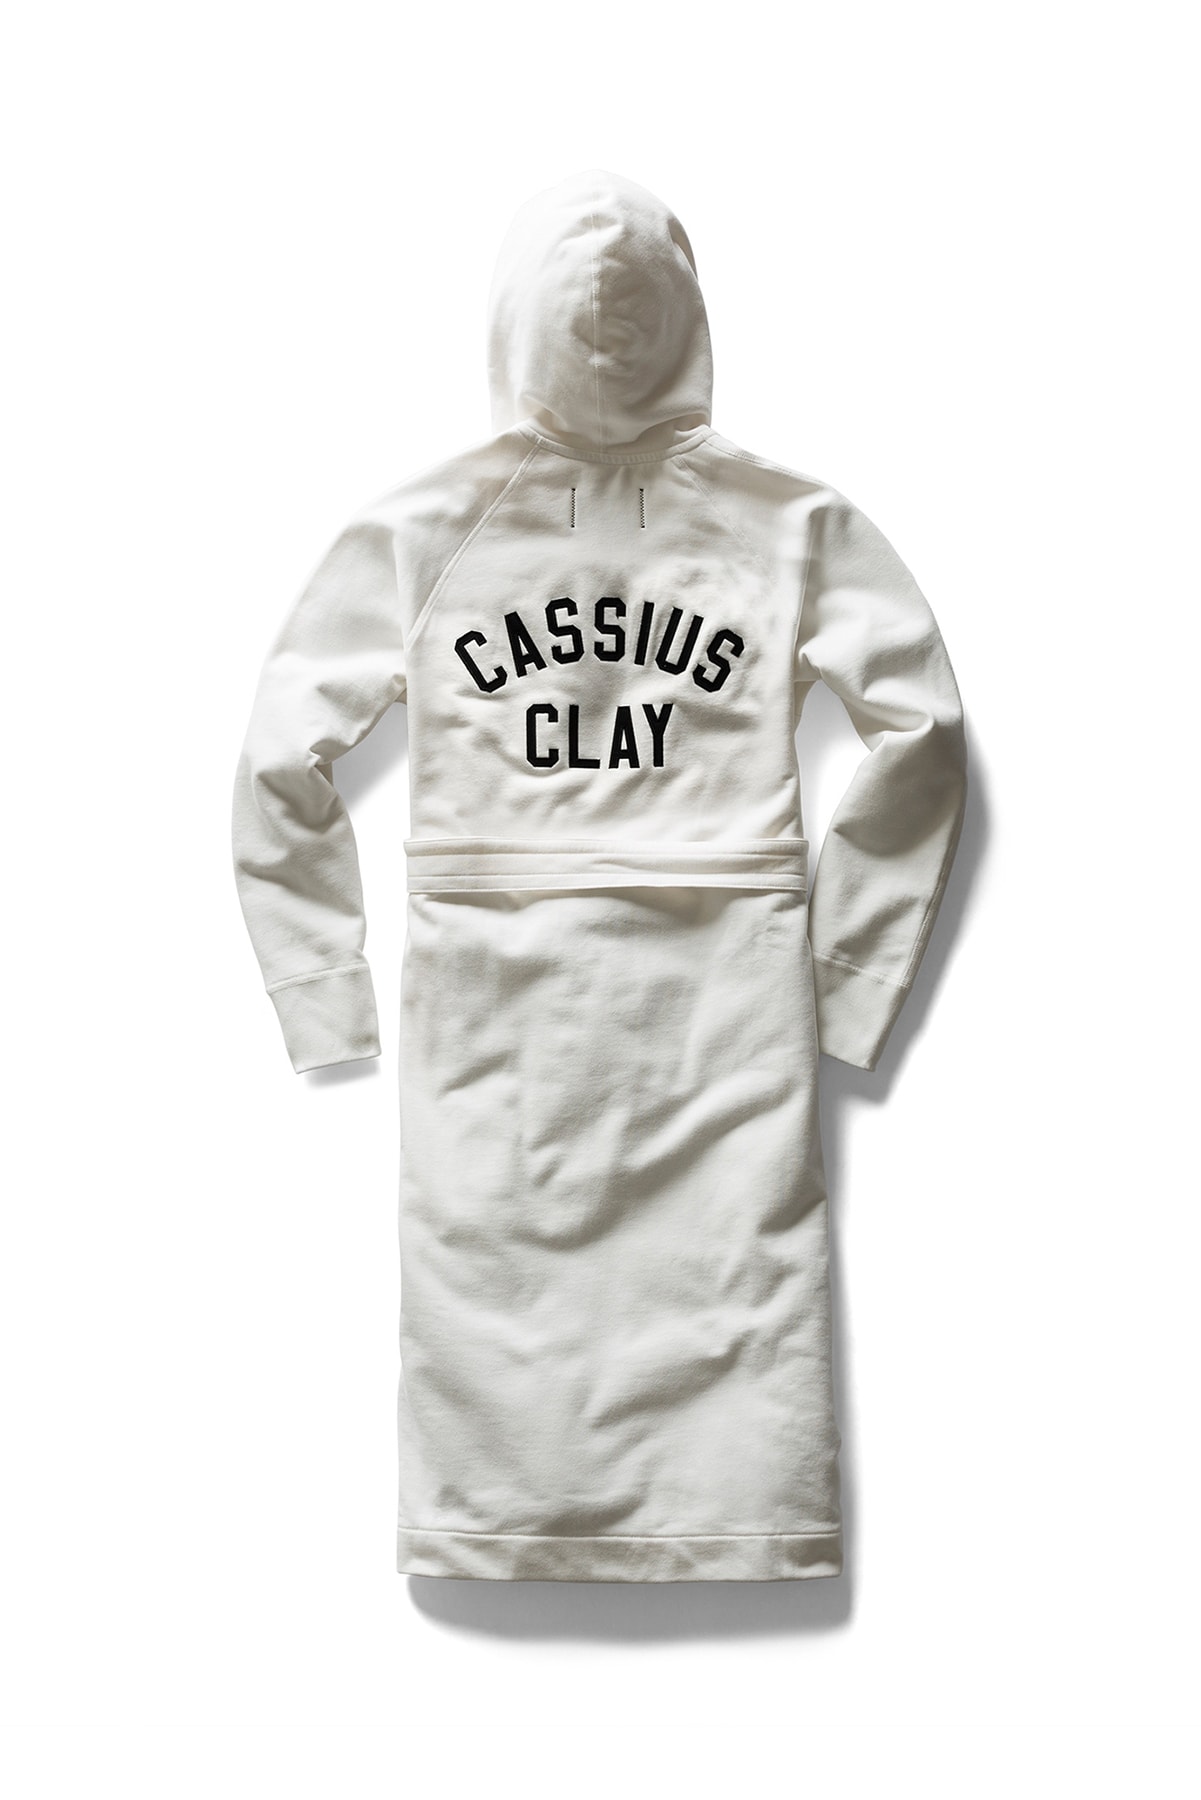 muhammad ali cassius clay reigning champ collaboration august 2 2018 white robe